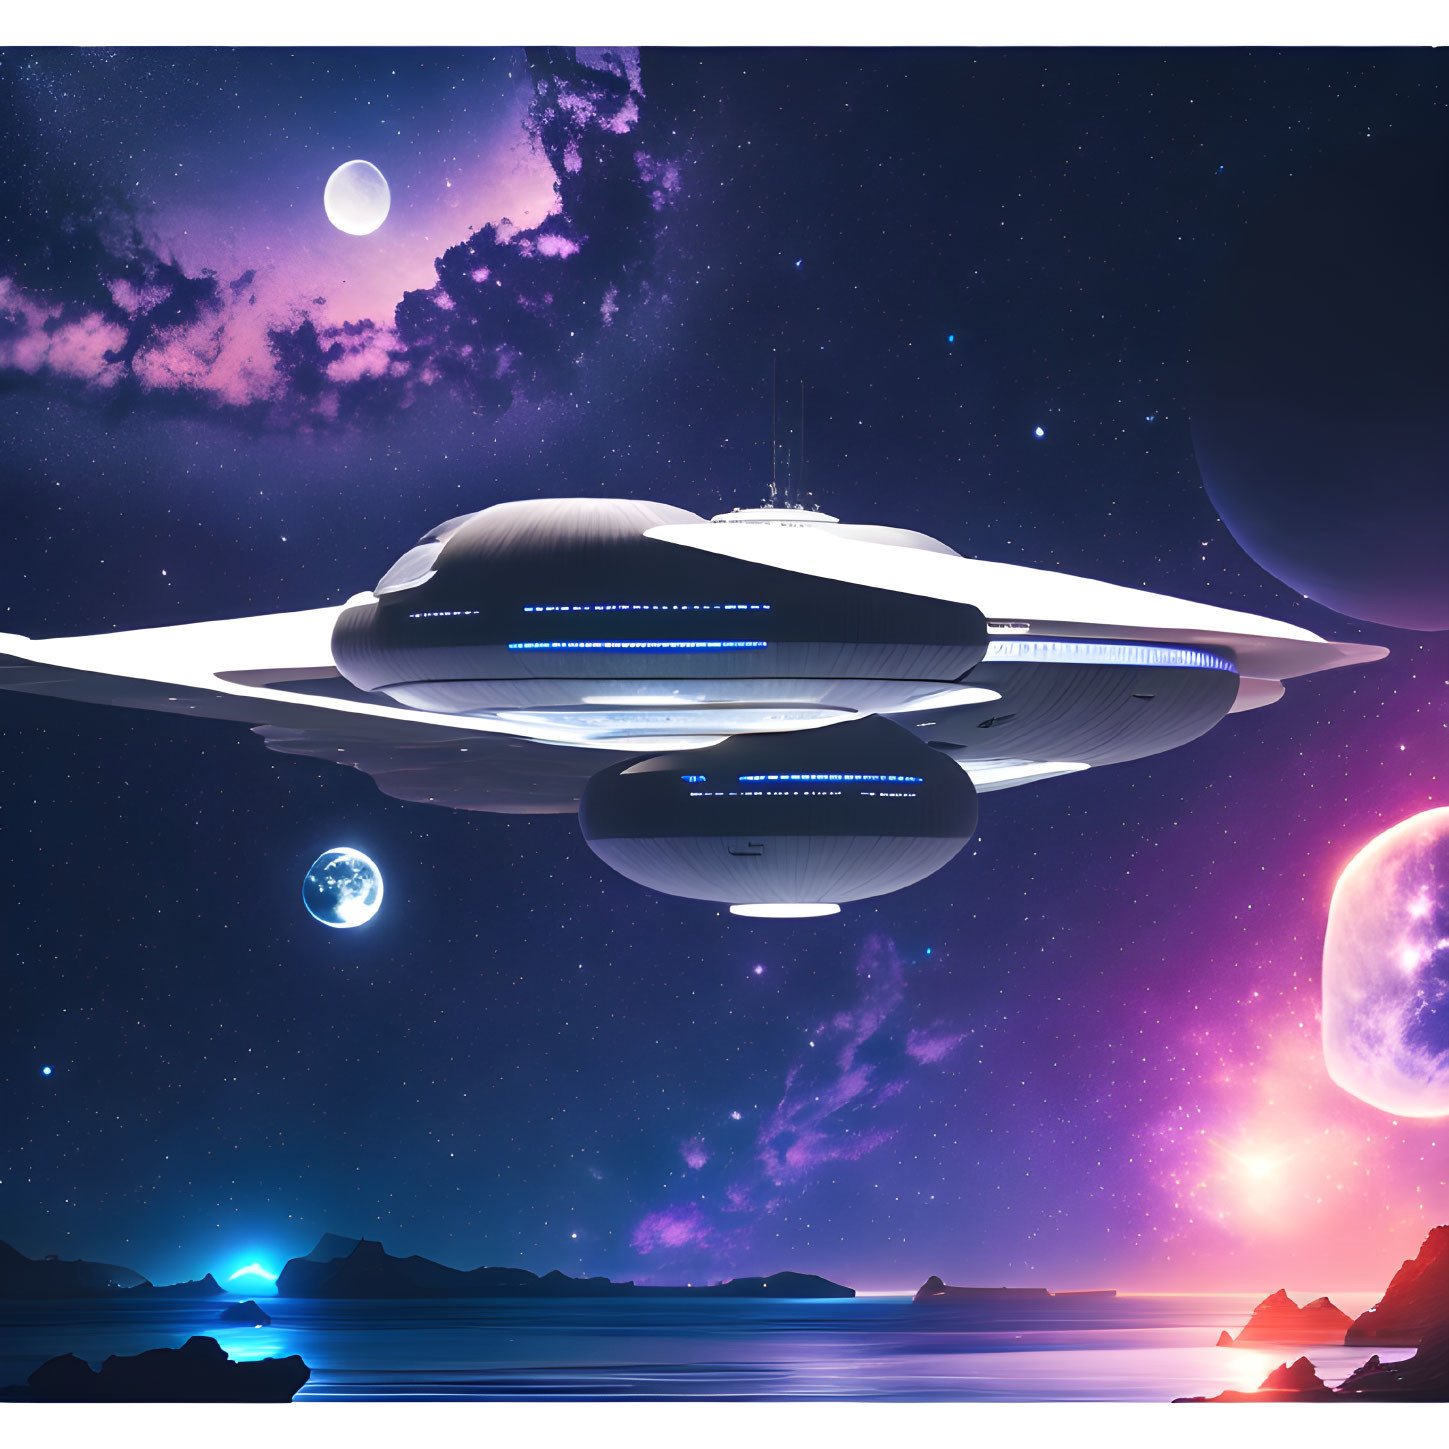 Futuristic spaceship above serene landscape with multiple moons